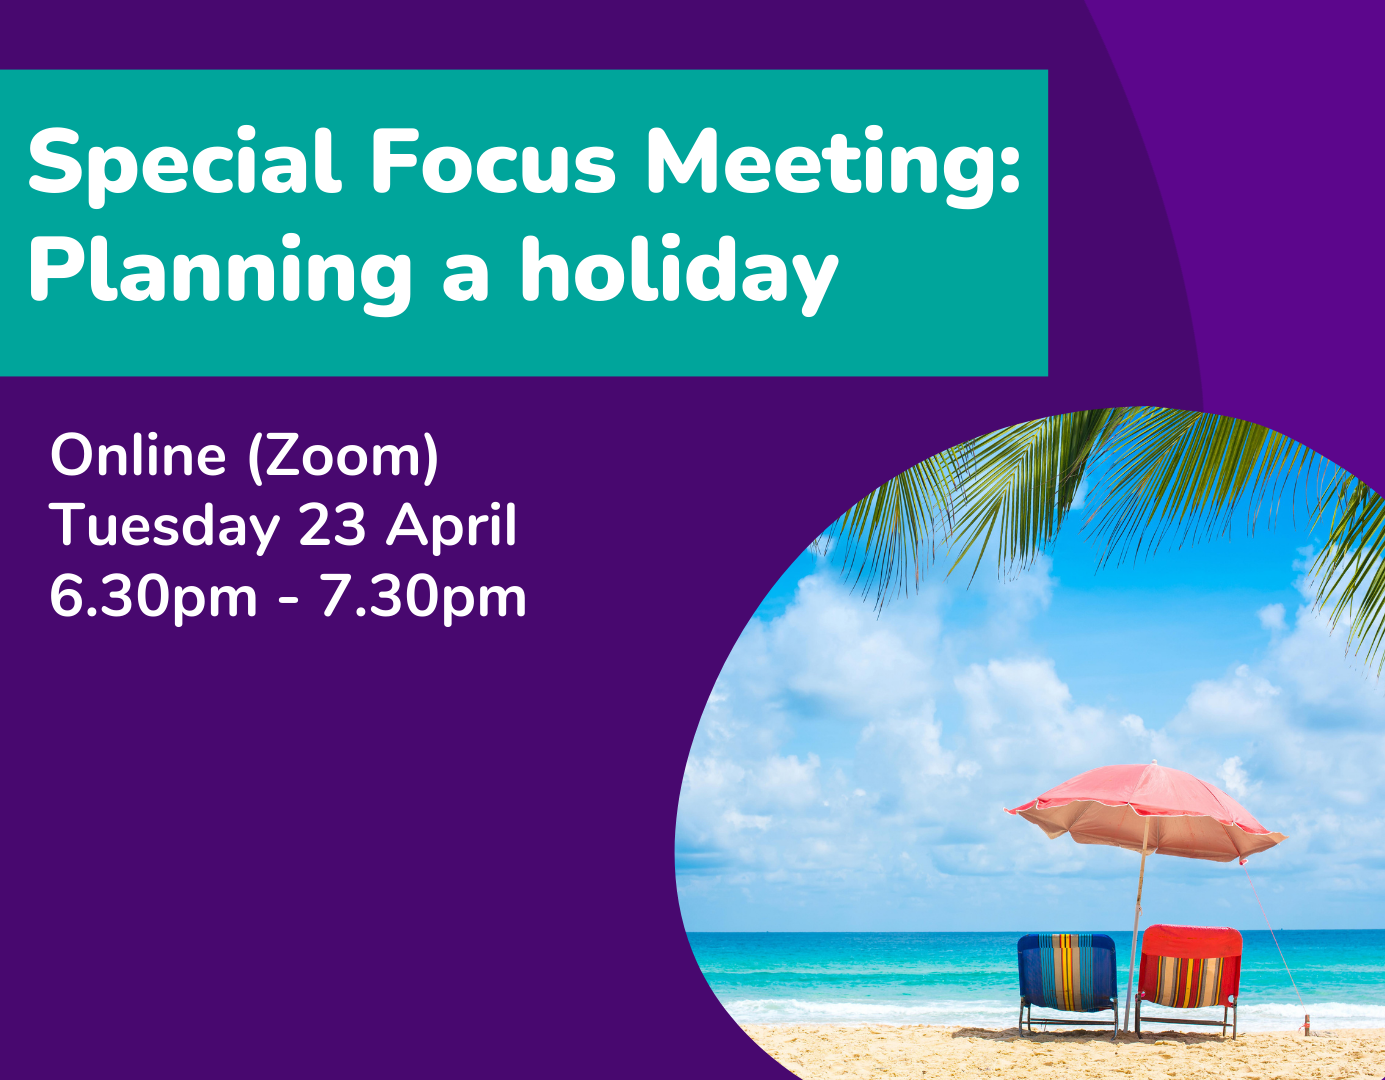 Special Focus Meeting Planning a holiday Online (Zoom) Tuesday 23 April 6.30pm - 7.30pm